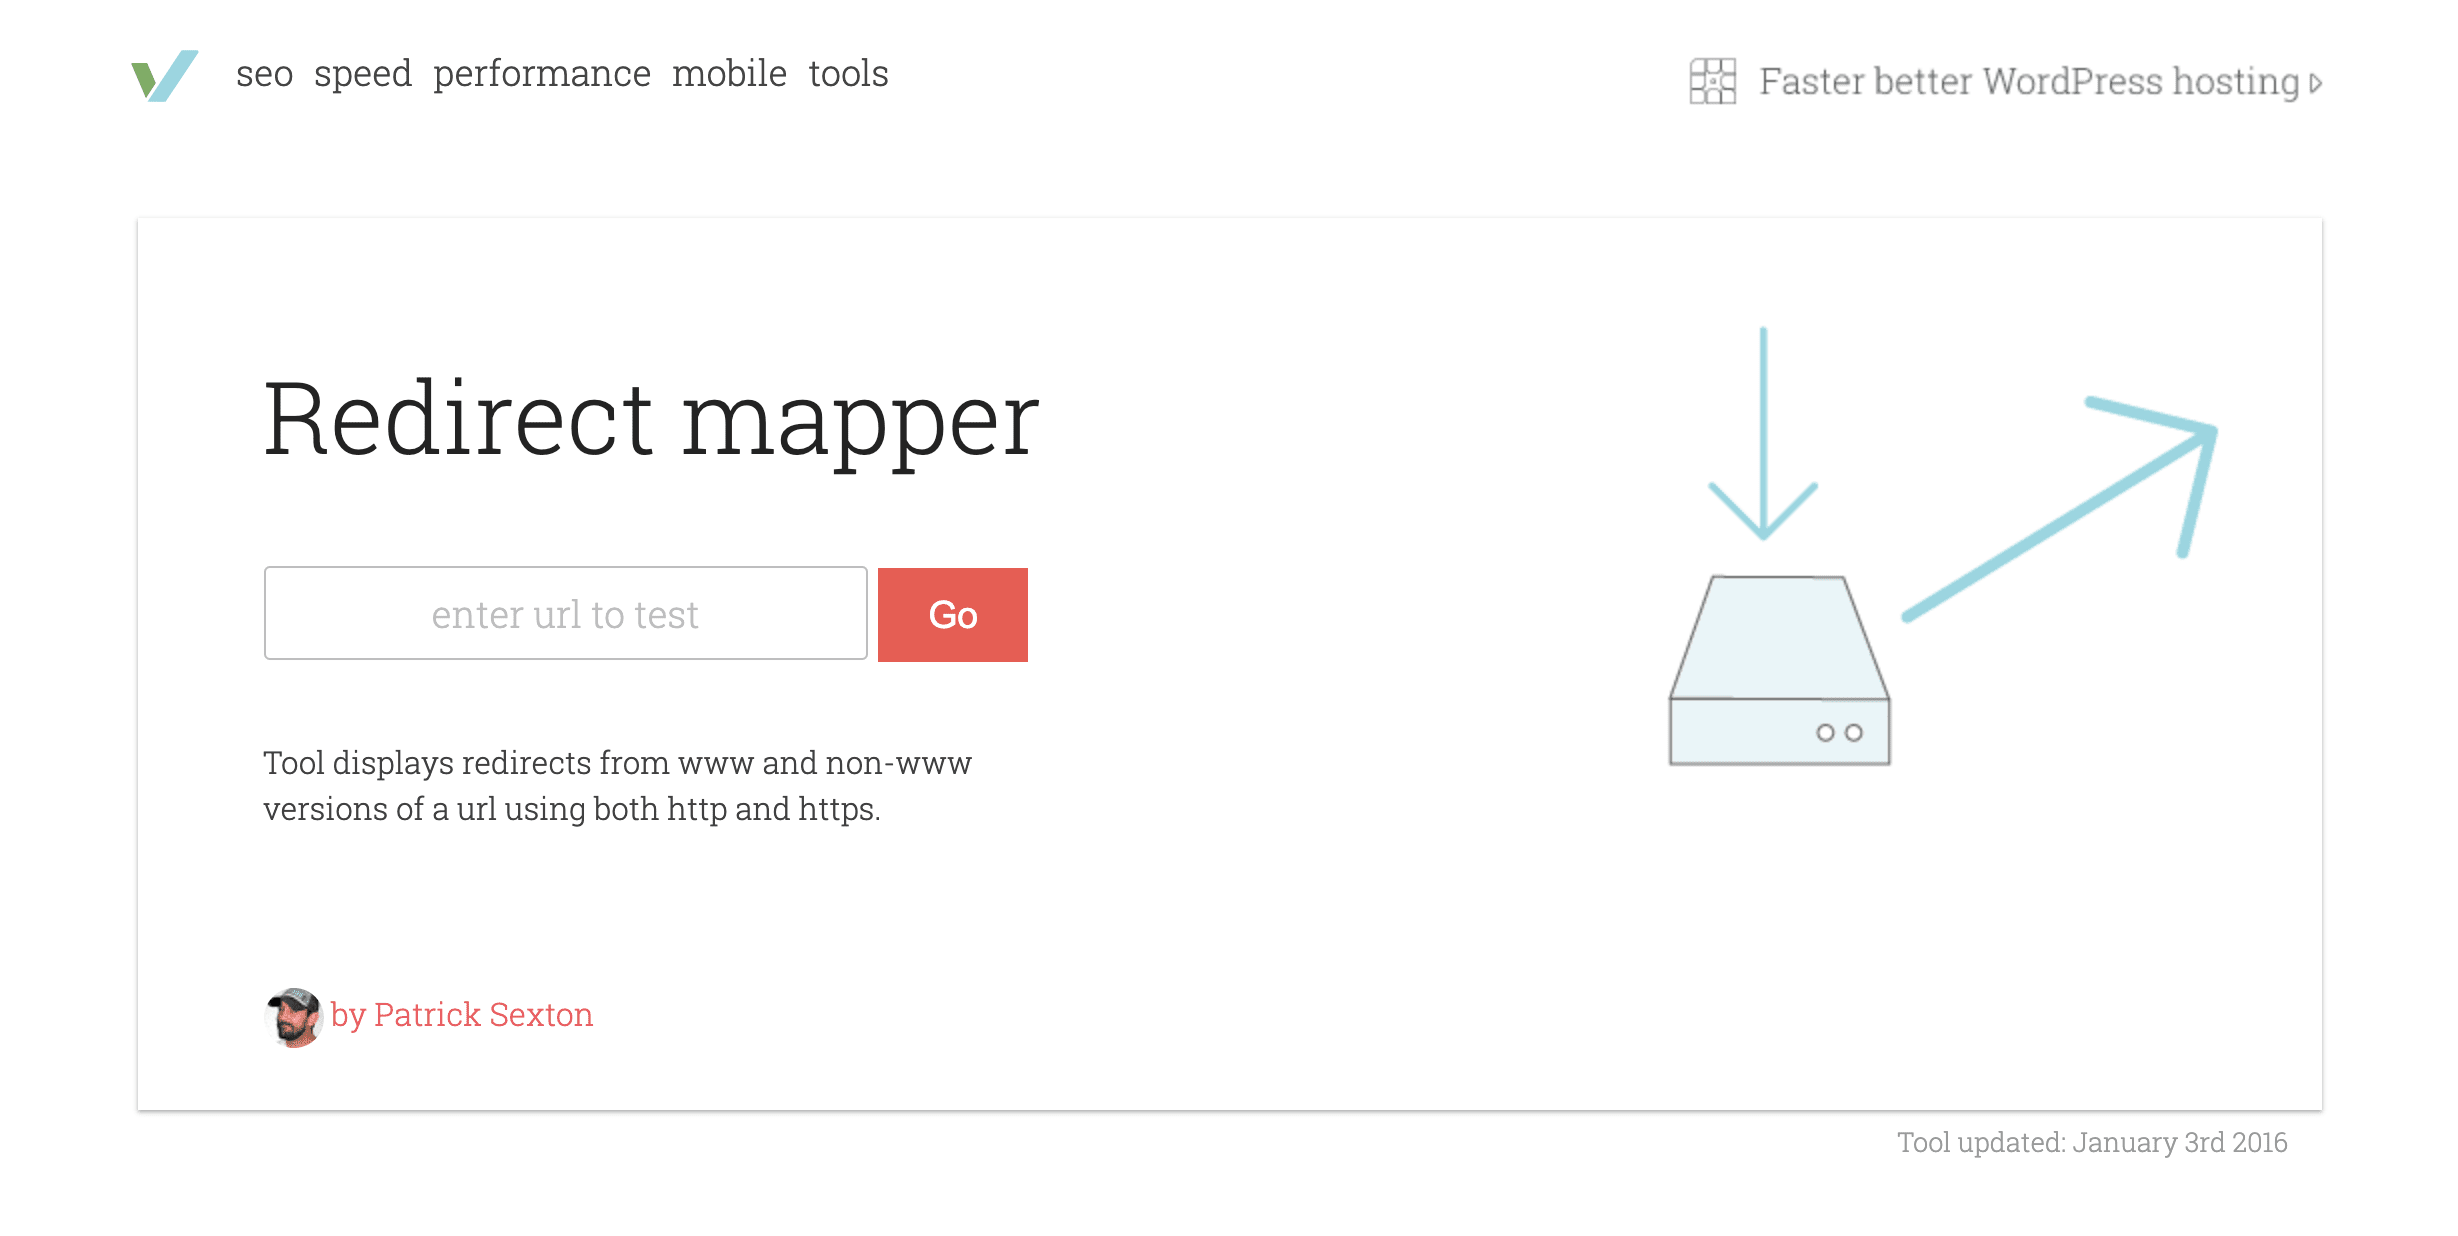 The Redirect mapper tool.